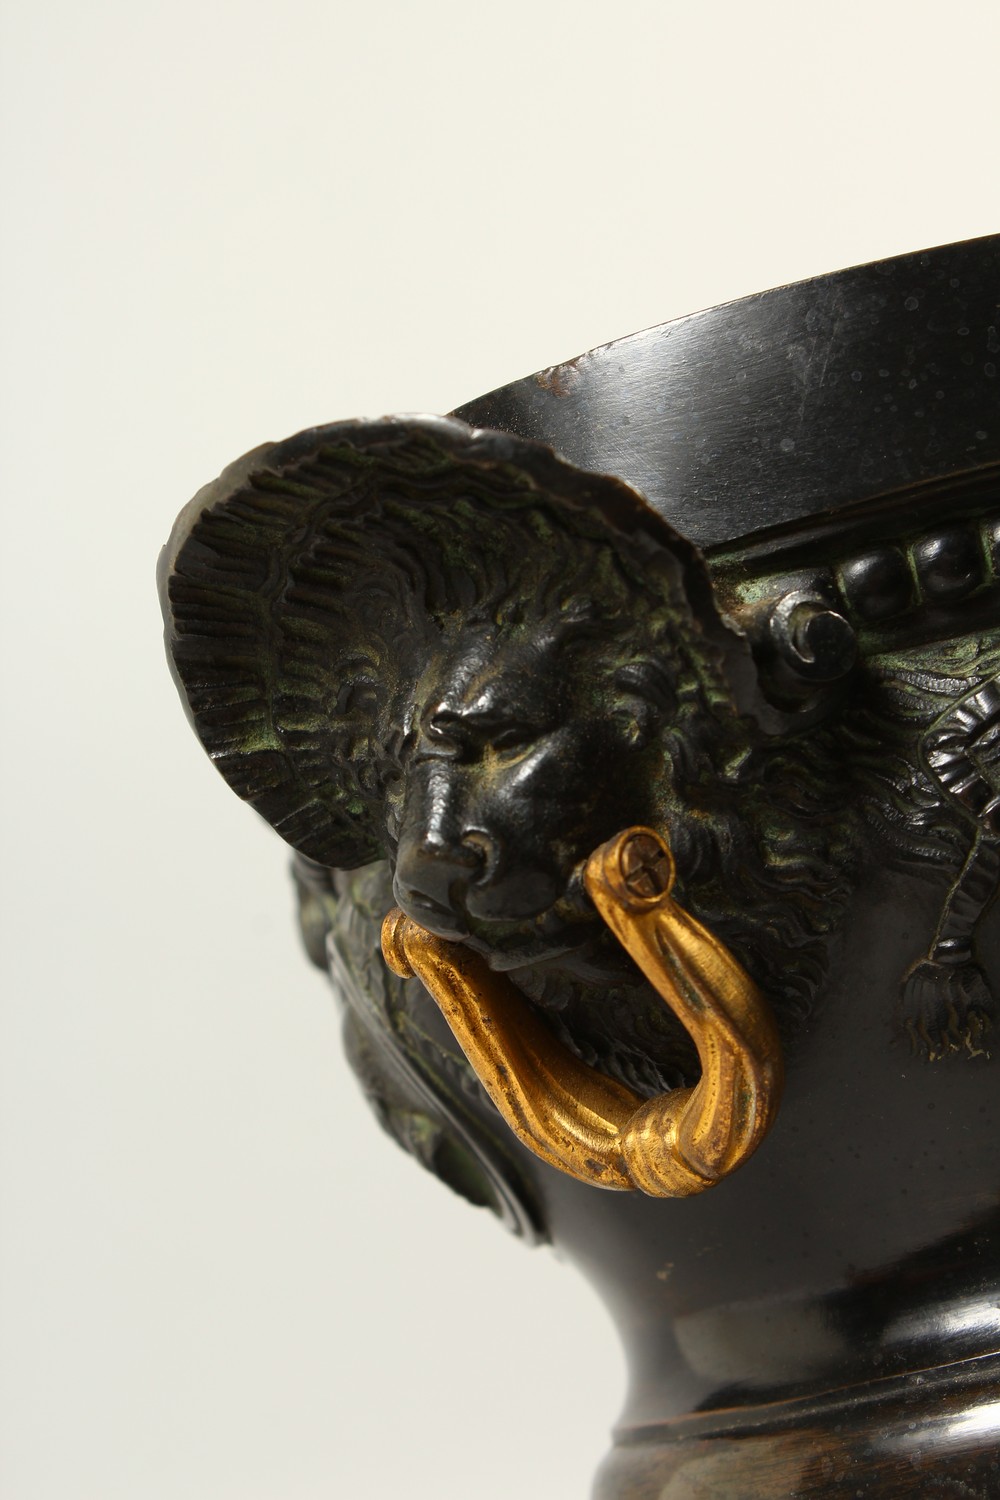 A PAIR OF 19TH CENTURY CAST BRONZE URNS, with lions mask and gilded handles, the body decorated with - Image 2 of 4